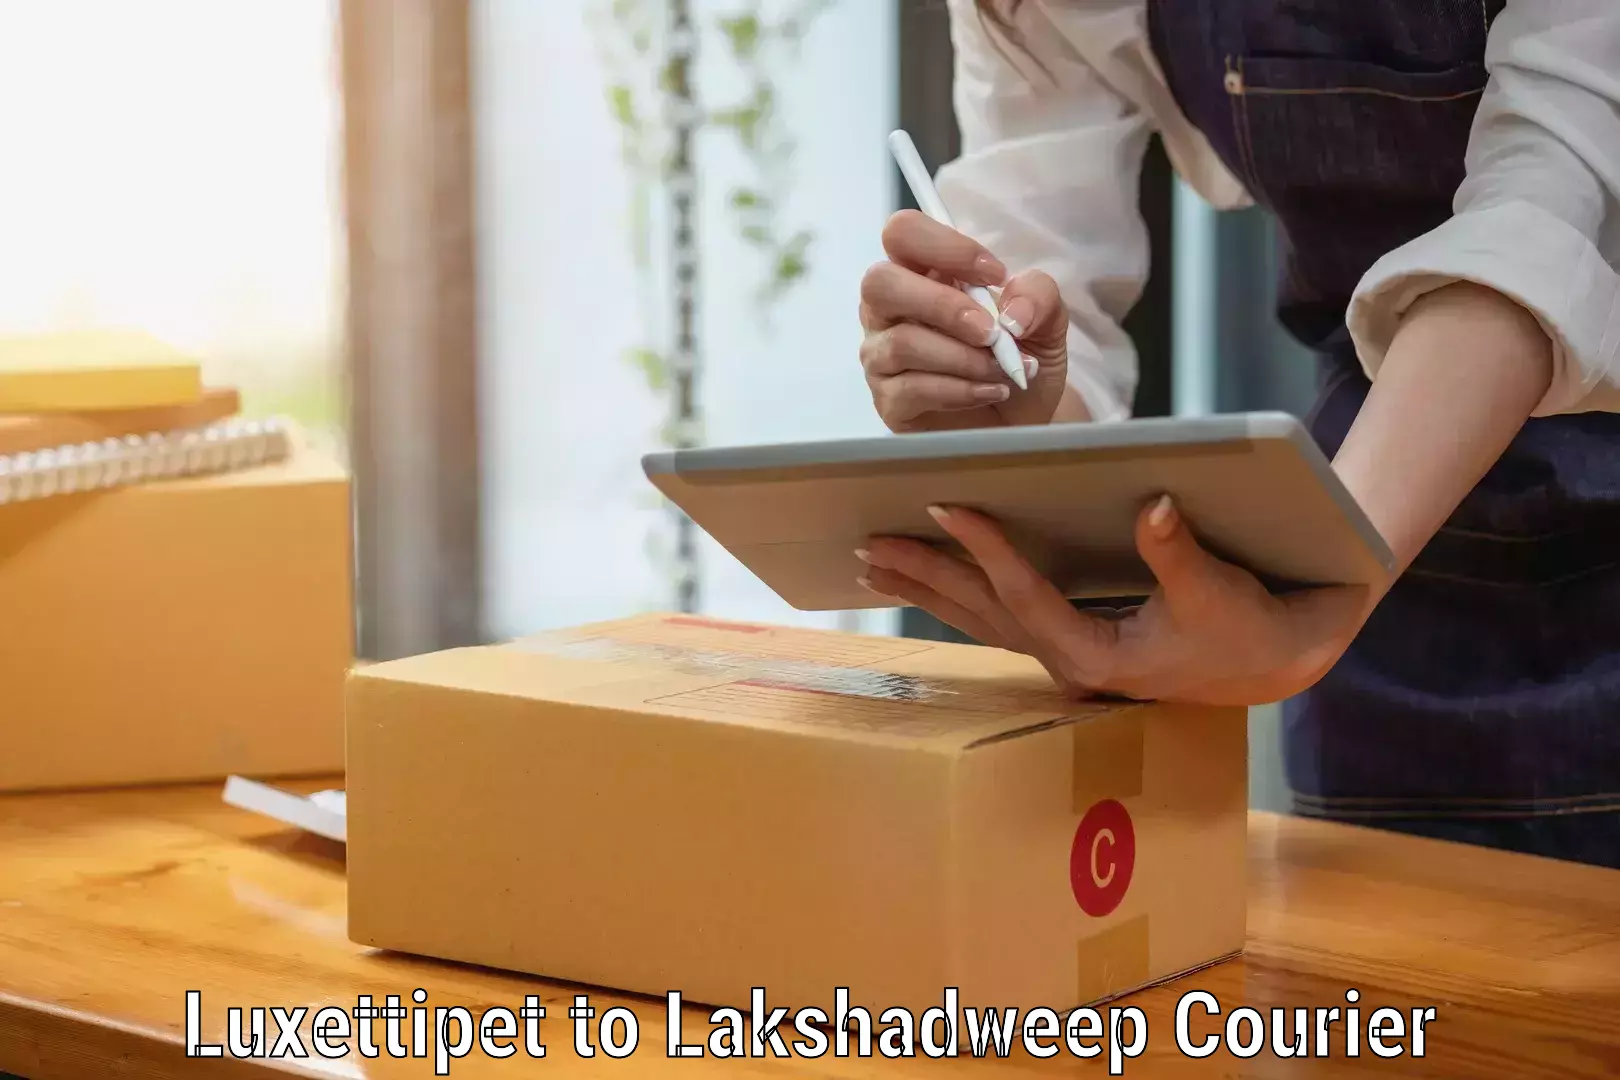 Quality moving company Luxettipet to Lakshadweep